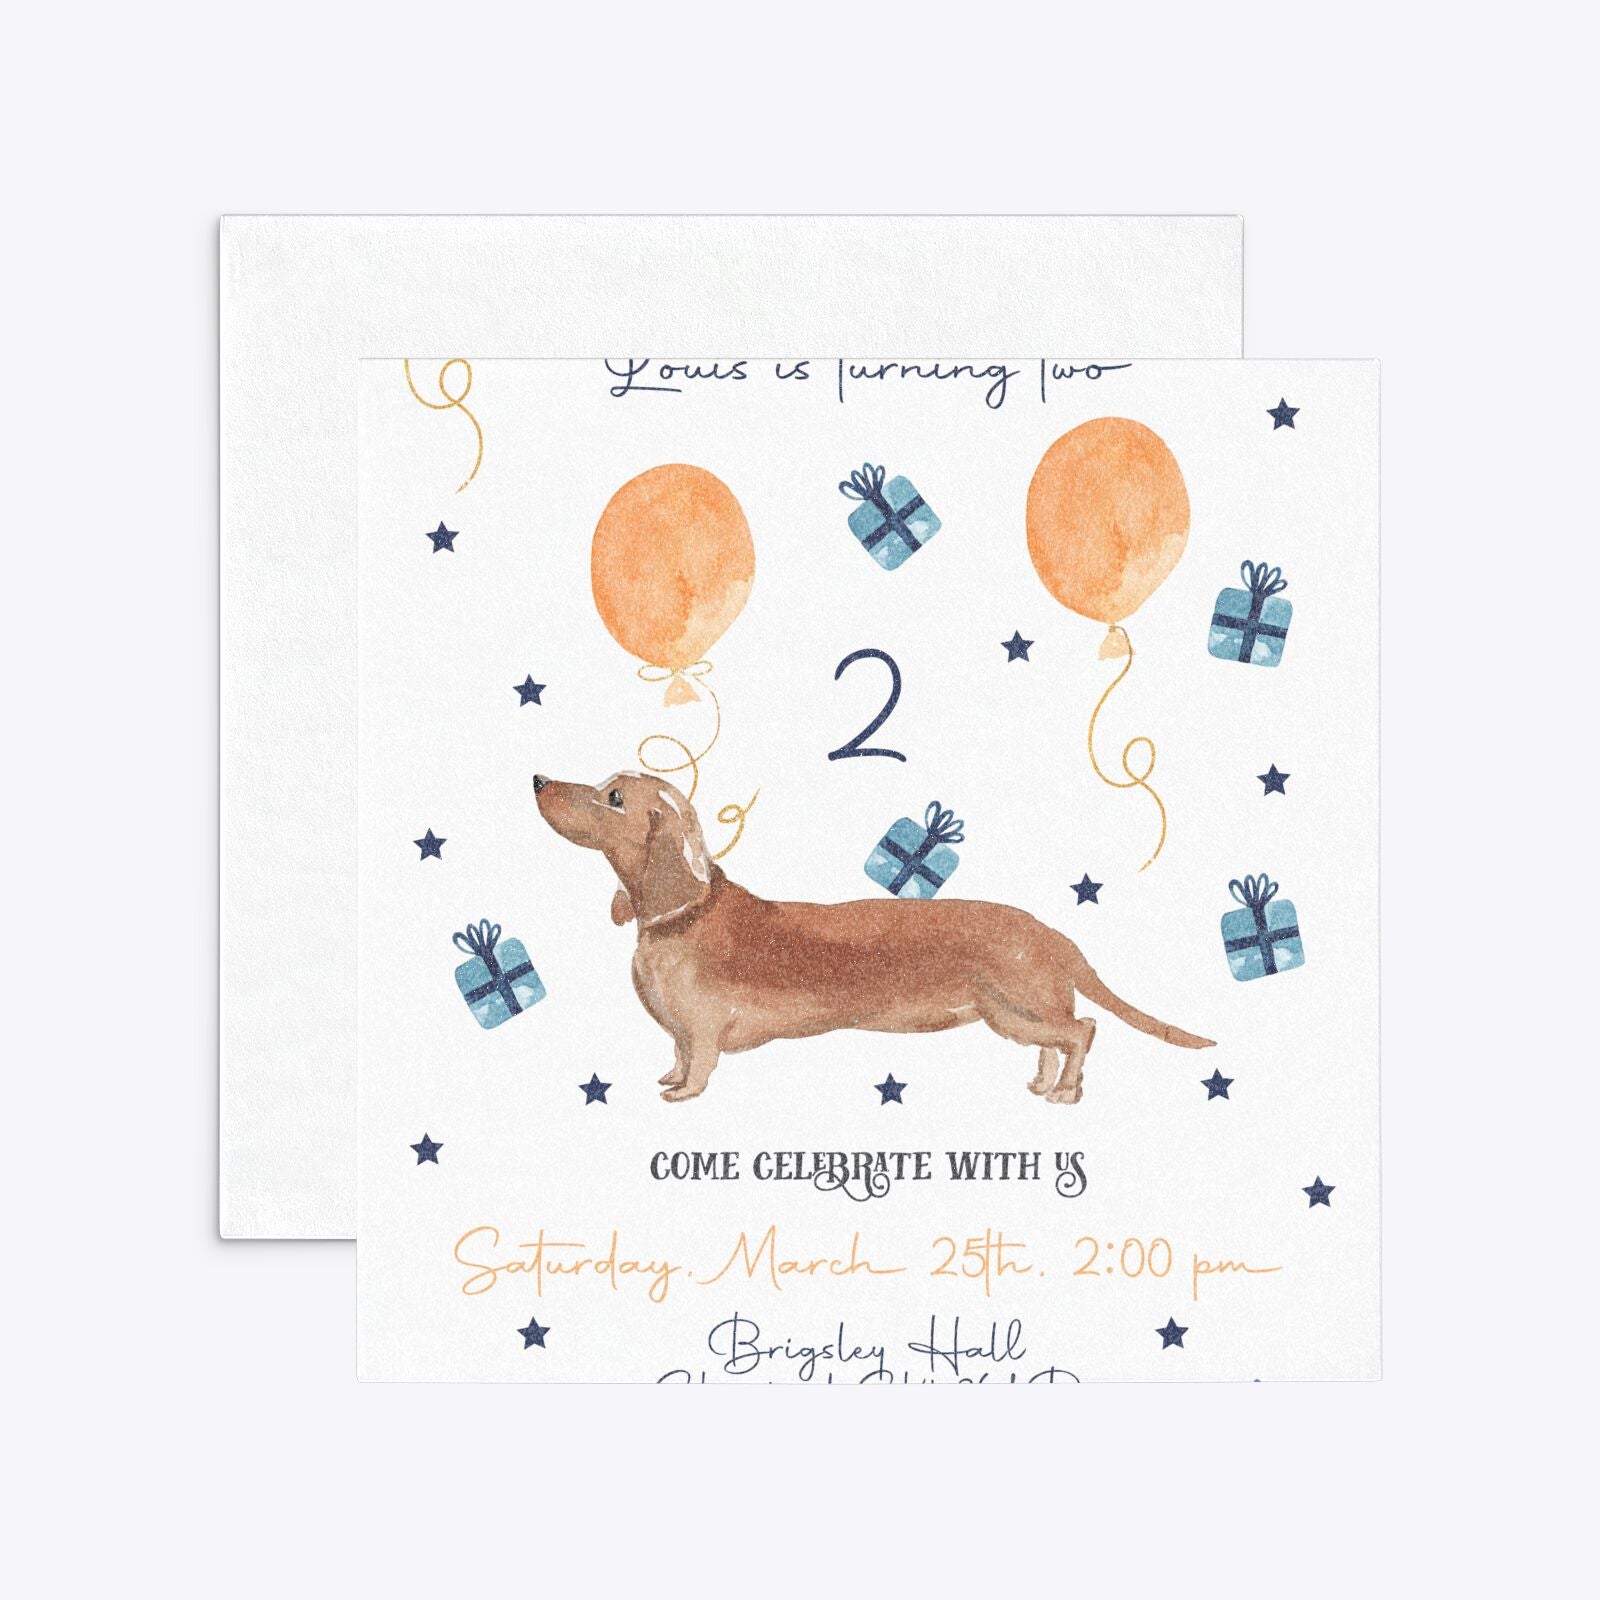 Personalised Dachshund Birthday Square 5 25x5 25 Invitation Glitter Front and Back Image